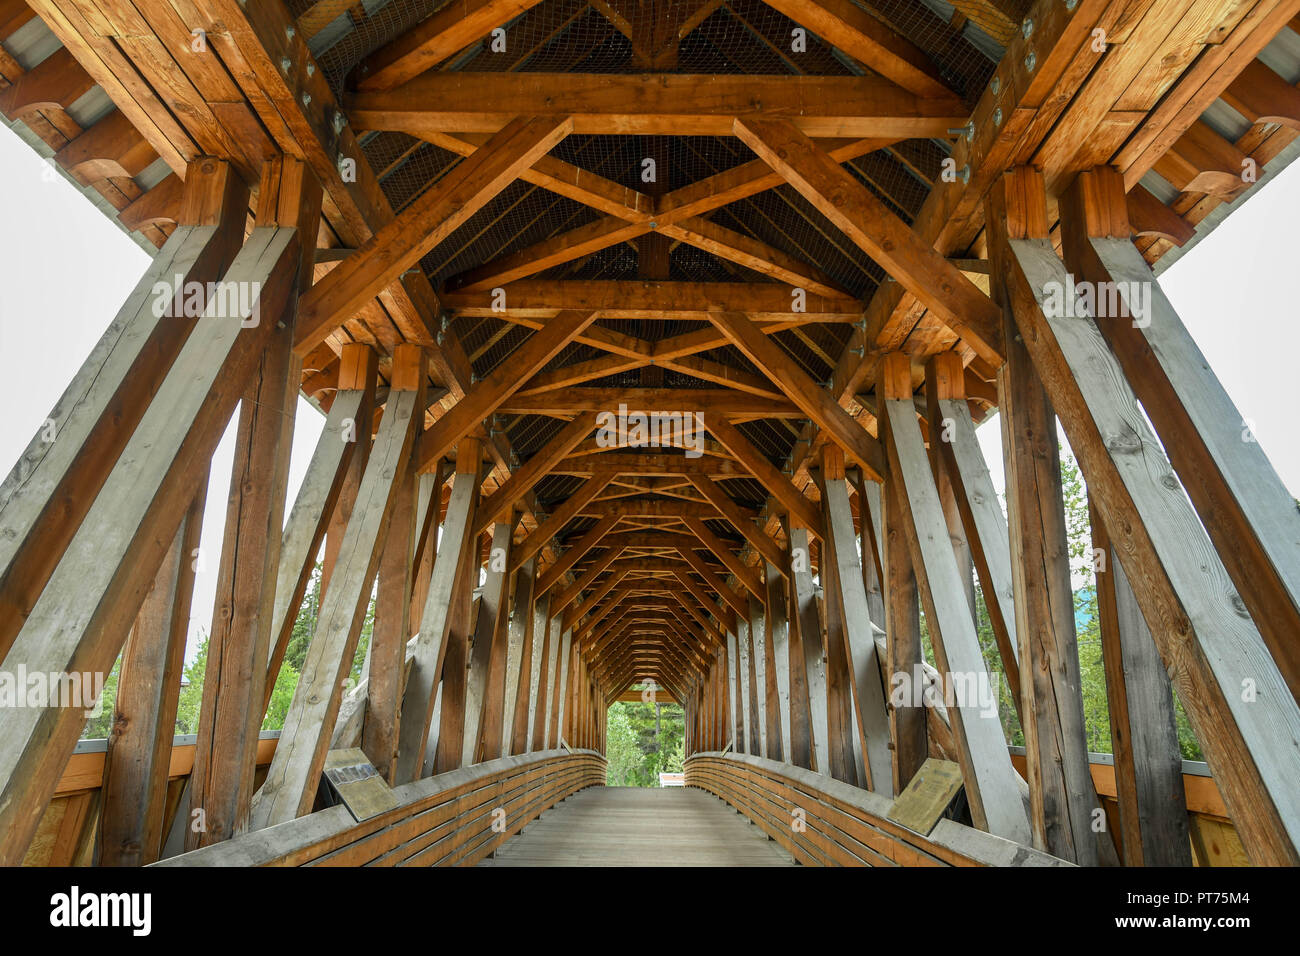 GOLDEN, BRITISH COLUMBIA, CANADA - JUNE 2018: Inside view of the timber construction of the Kicking Horse pedestrian bridge over the river of the same Stock Photo